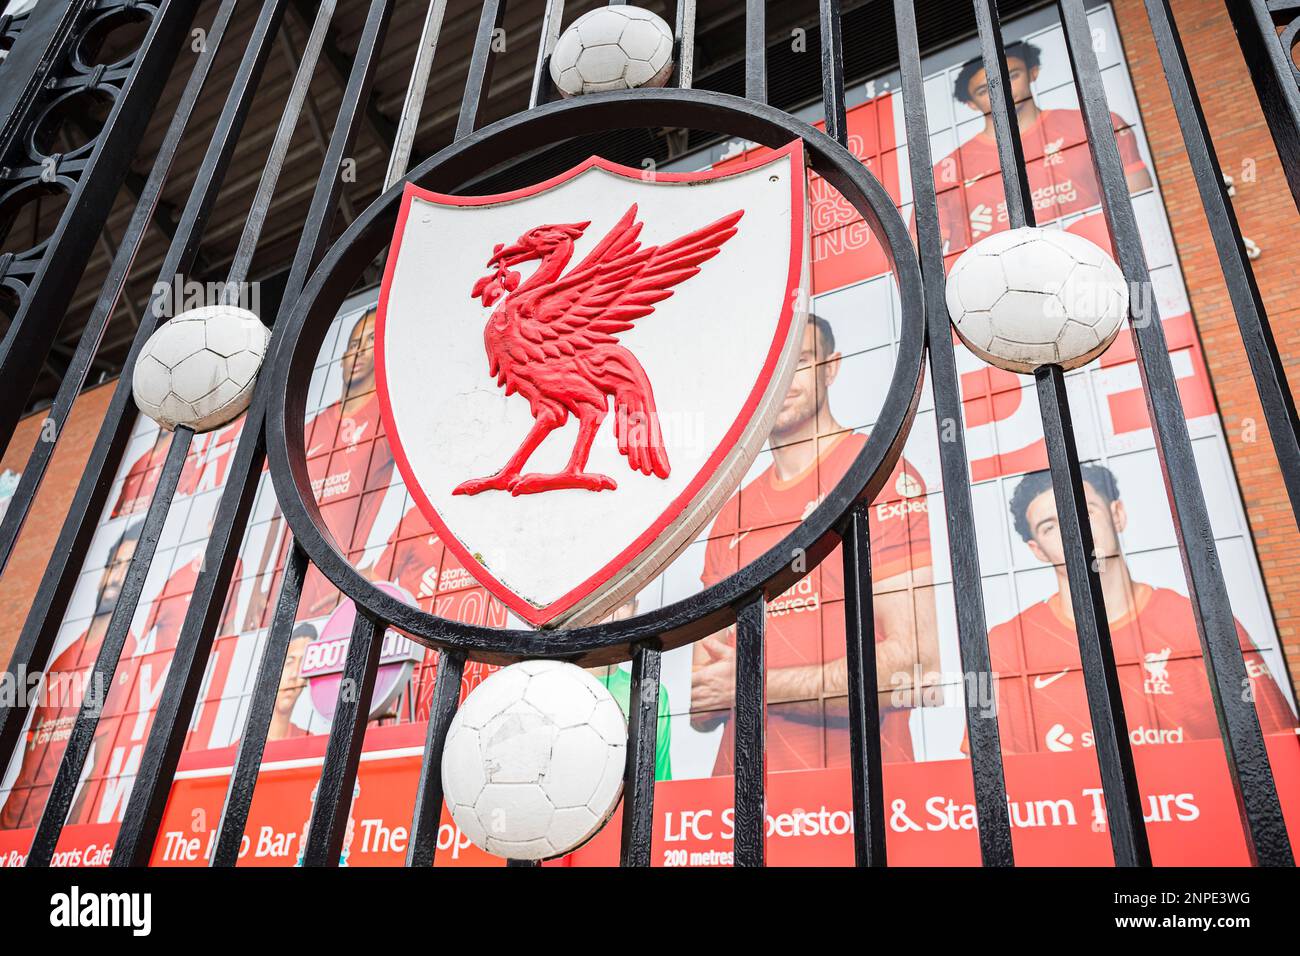 An old Liverpool Football Club badge in red and white pictured on the Paisley Gates outside Anfield stadium in Liverpool. Stock Photo